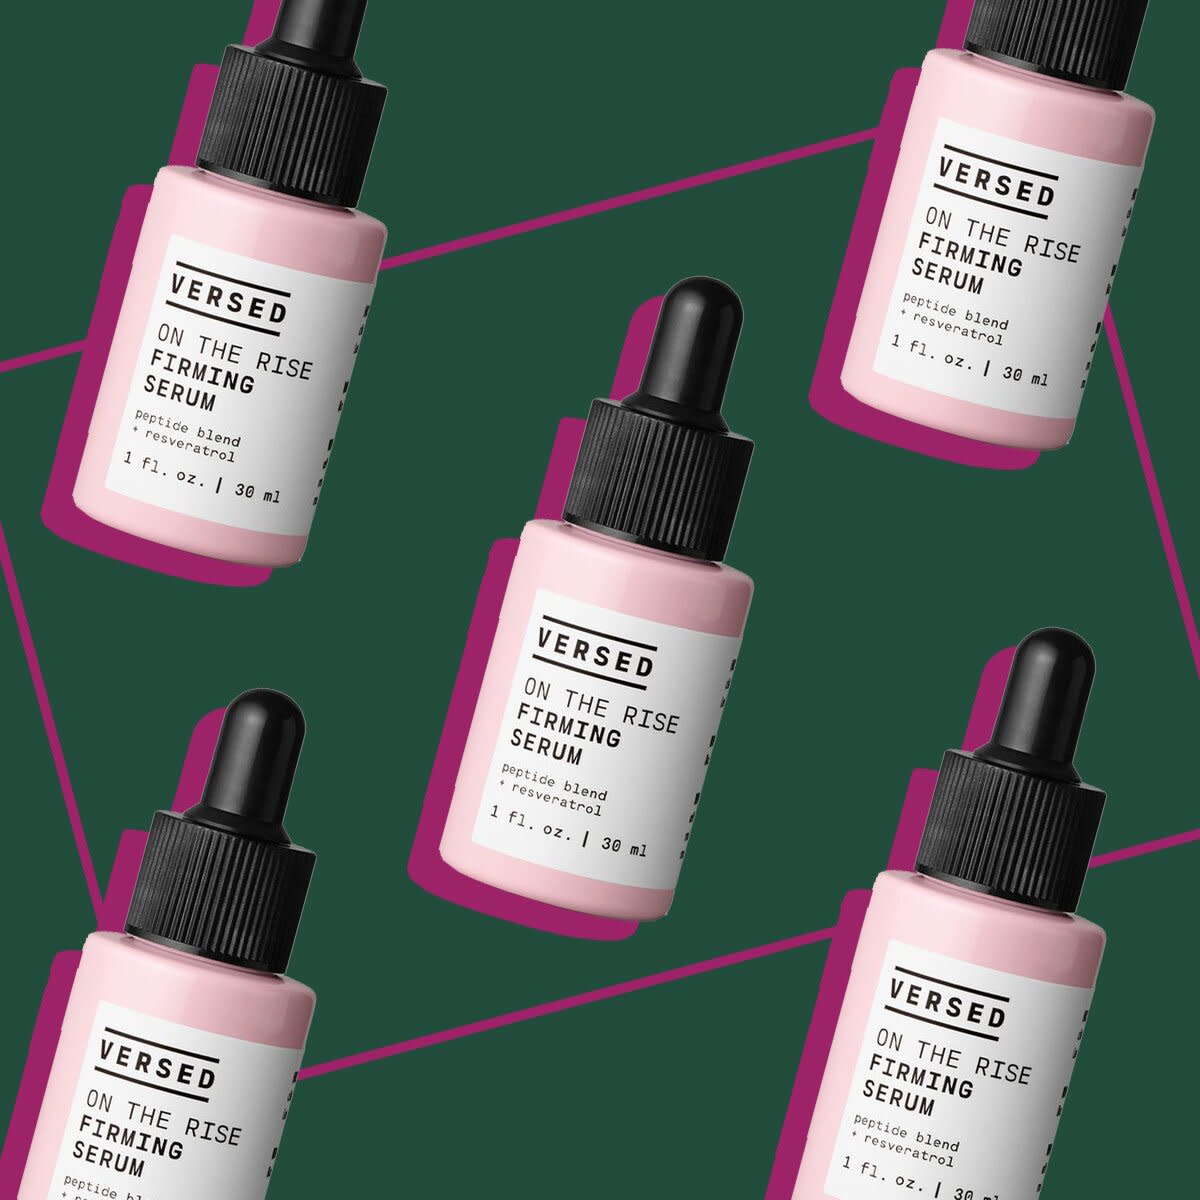 The Firming Serum Giving People Glass Skin Overnight Is Even Cheaper With This Exclusive Code